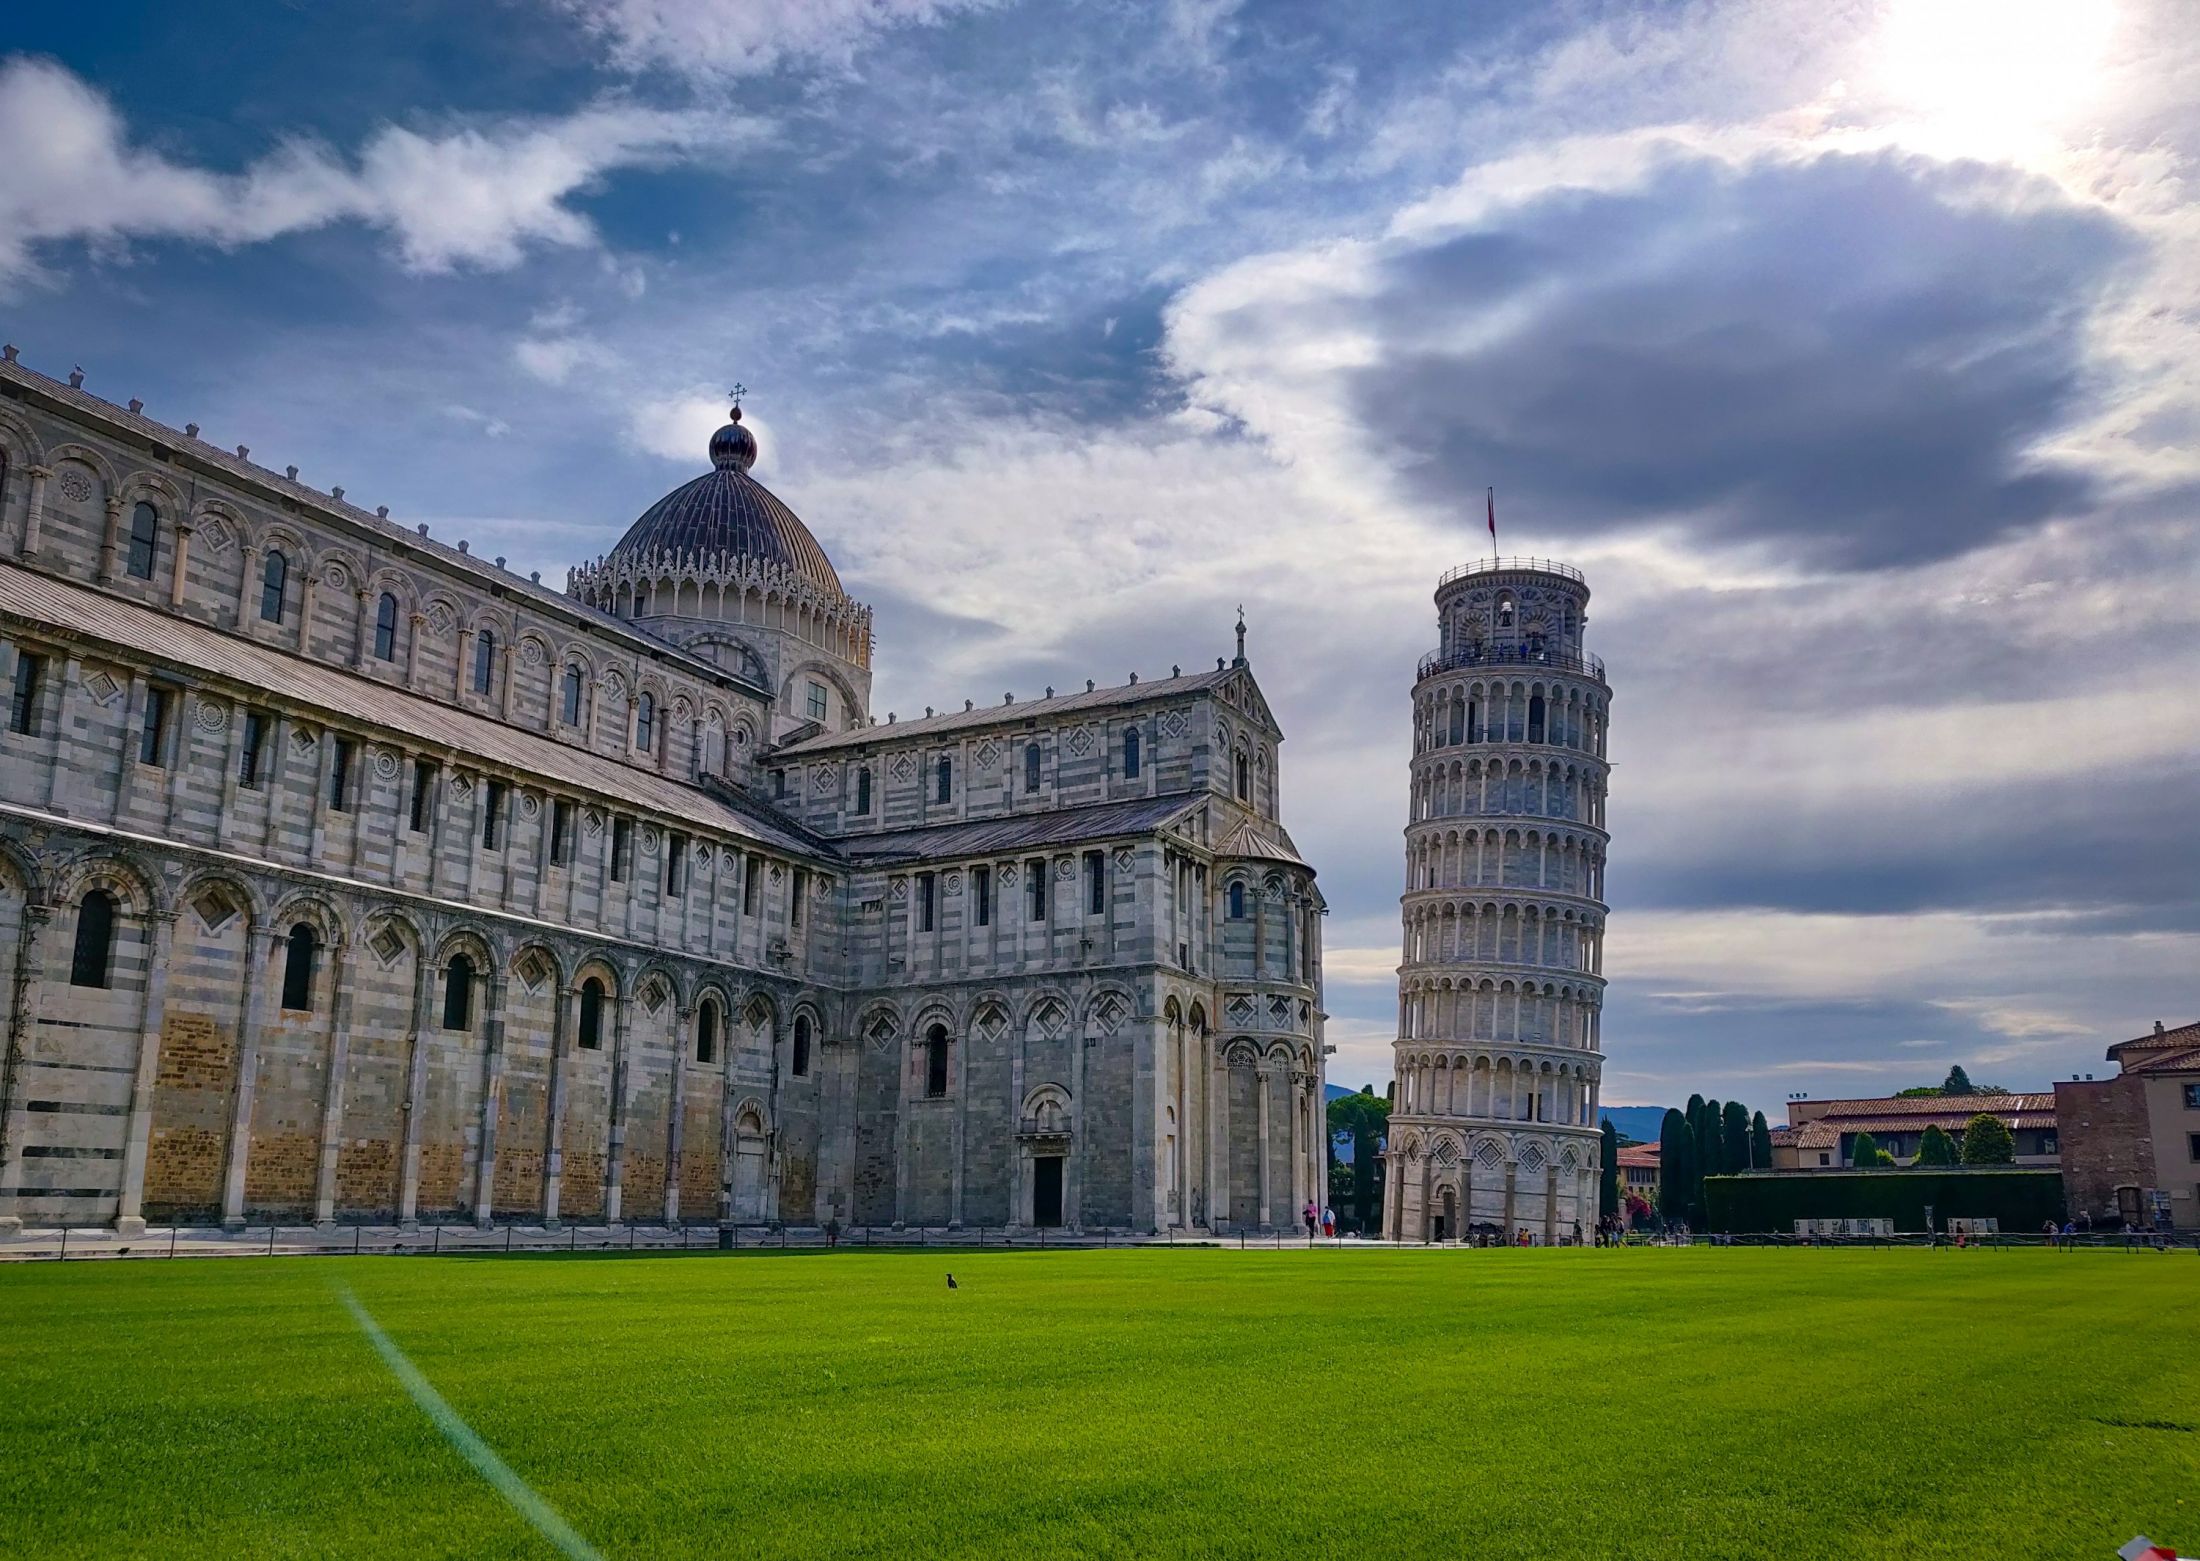 A Cloud over the leaning tower